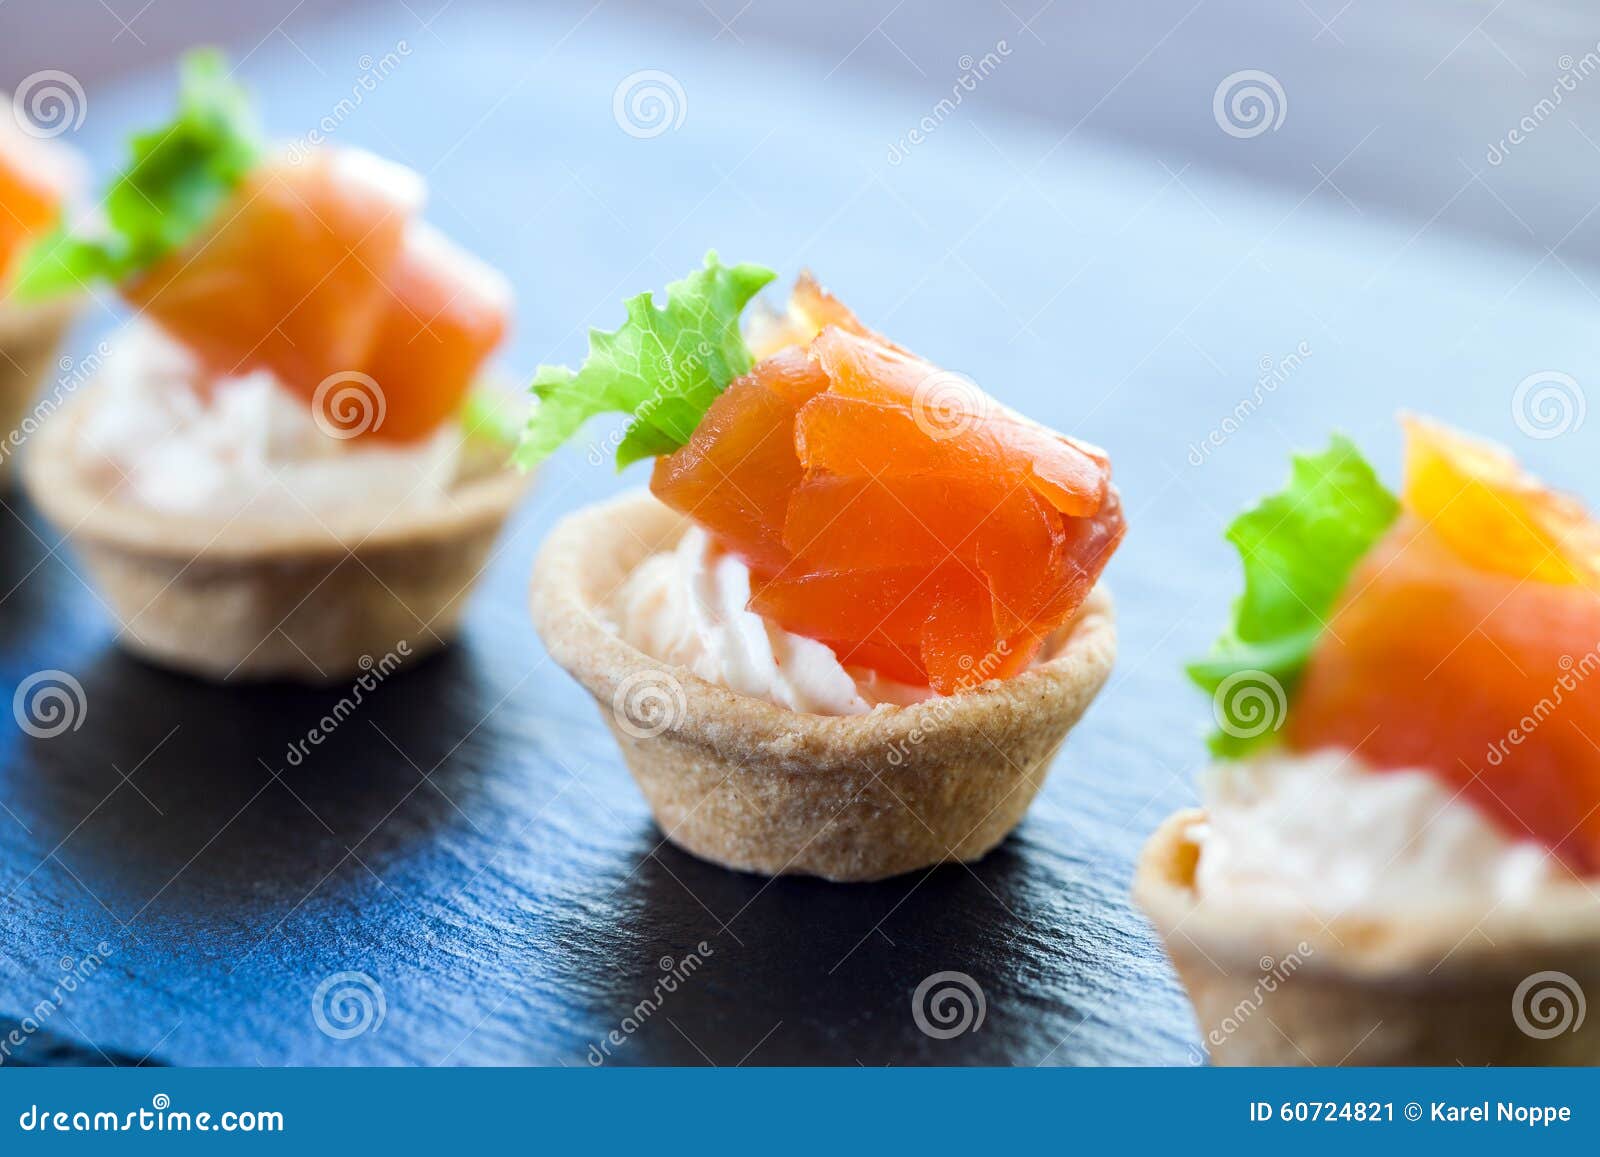 Mini Smoked Salmon Pastry Tartlets for Catering. Stock Image - Image of ...